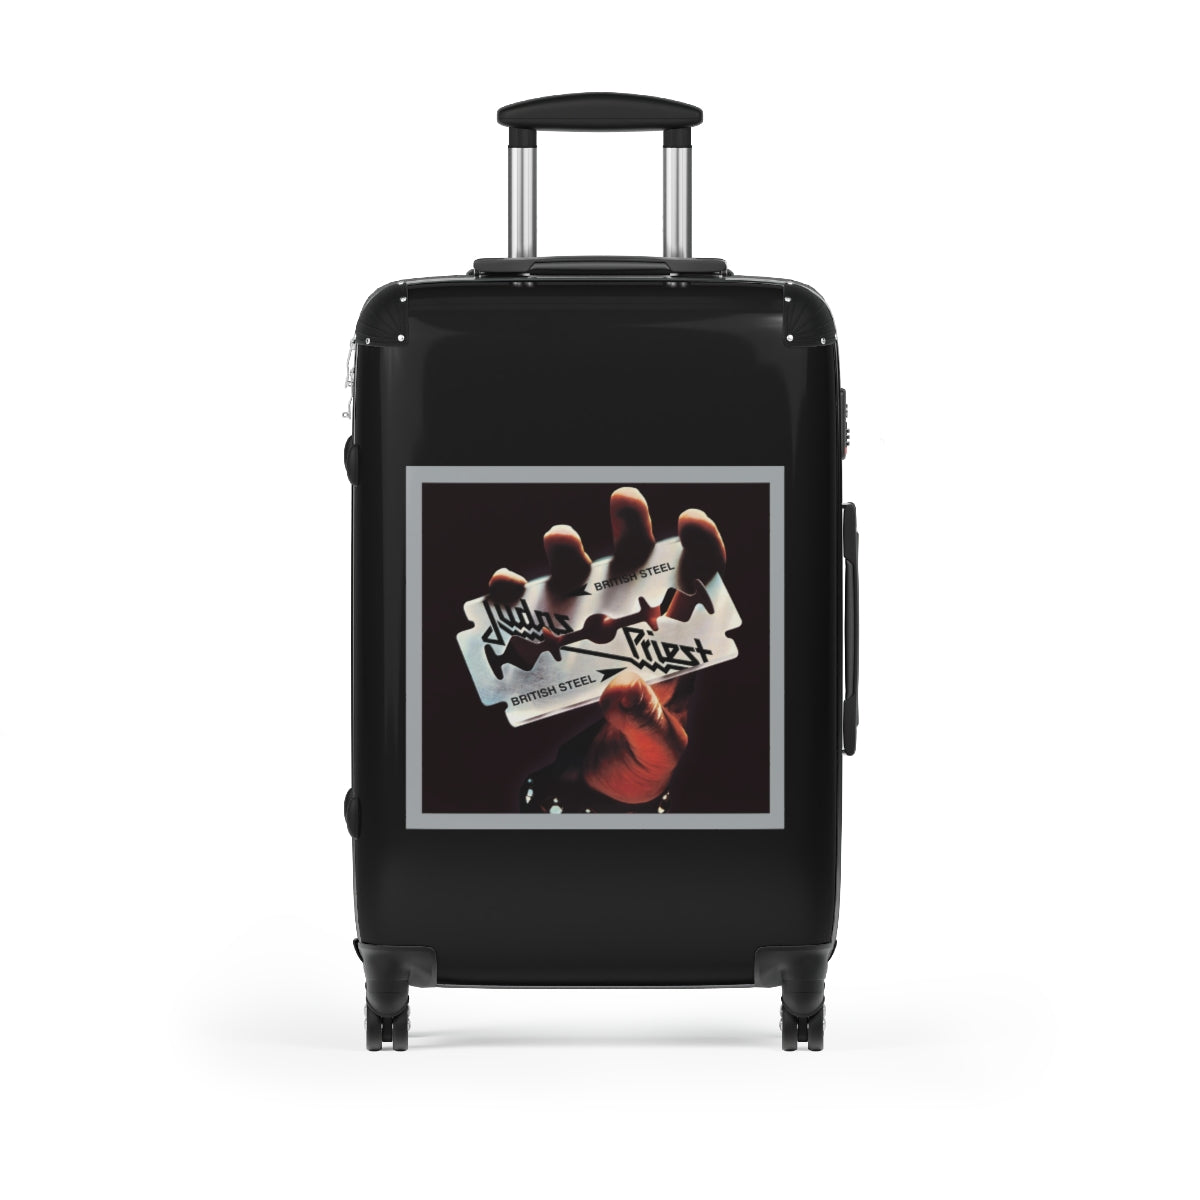 Getrott Judas Priest British Steel 1980 Black Cabin Suitcase Inner Pockets Extended Storage Adjustable Telescopic Handle Inner Pockets Double wheeled Polycarbonate Hard-shell Built-in Lock